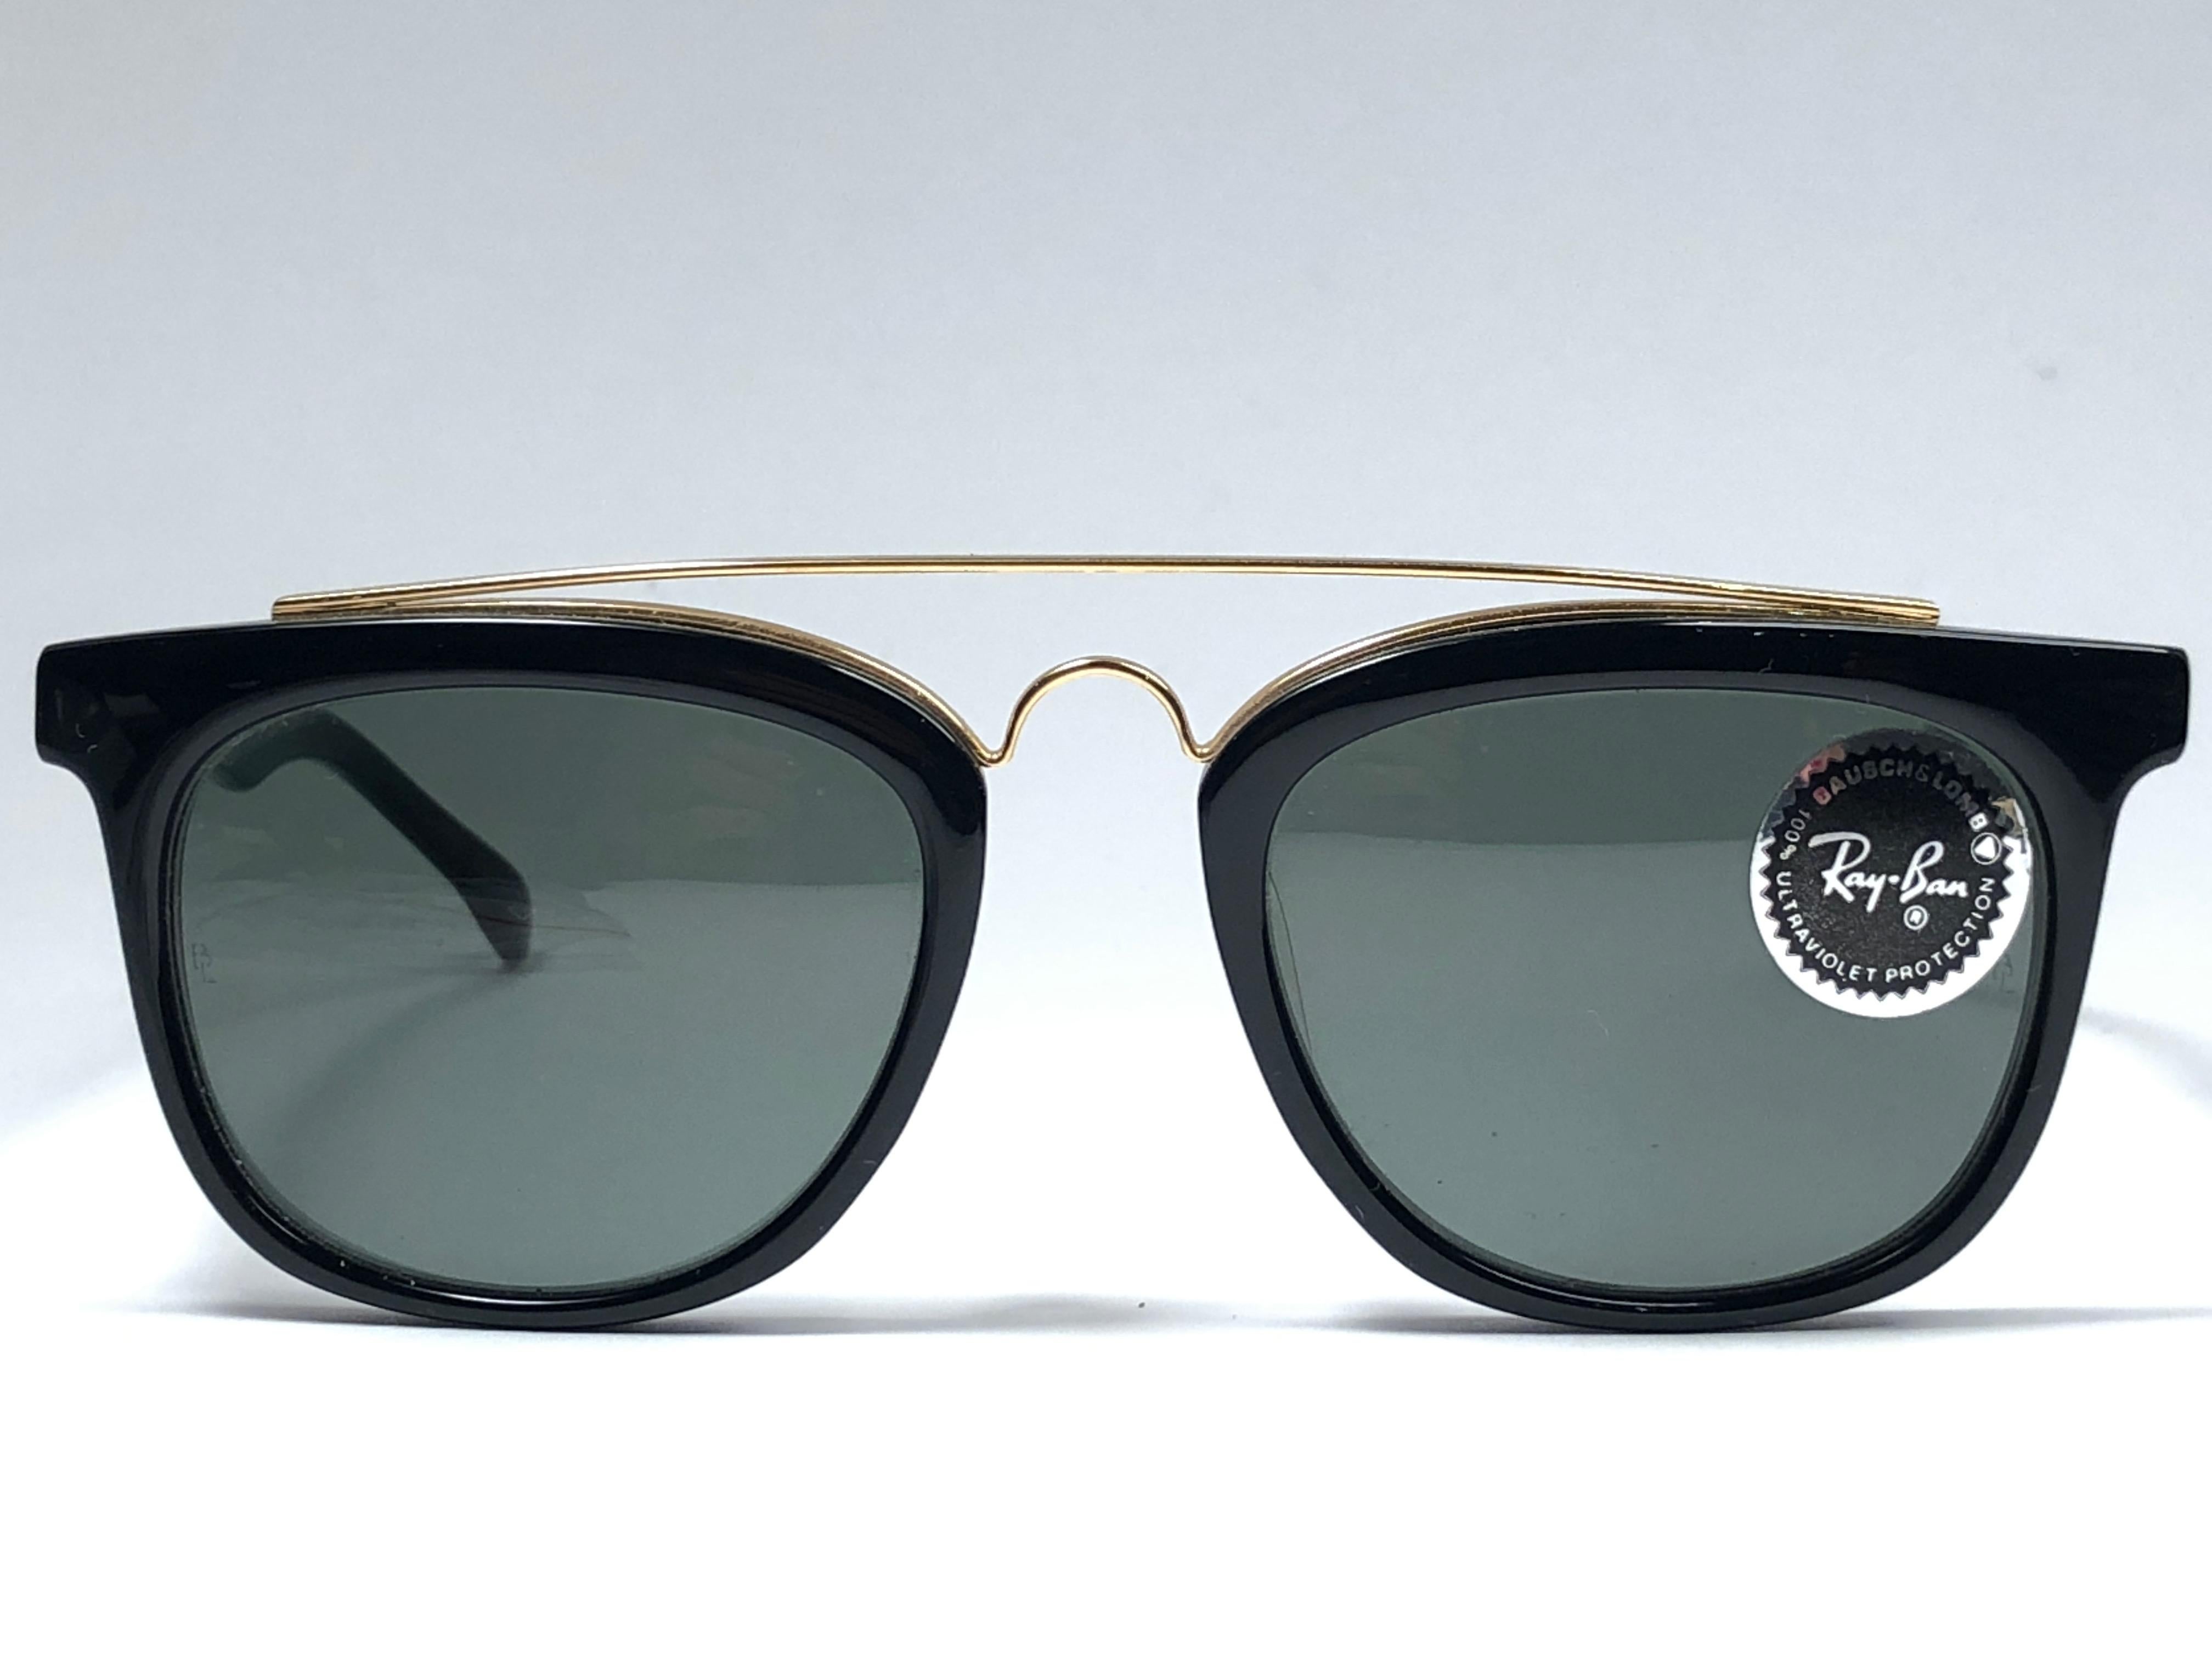 New Vintage Ray Ban Oval Gold Gatsby frame with G15 grey Lenses without Ray Ban logo. Comes with its original Ray Ban B&L case.  
This piece may show minor sign of wear due to storage.  
A seldom piece in new, never worn or displayed condition.